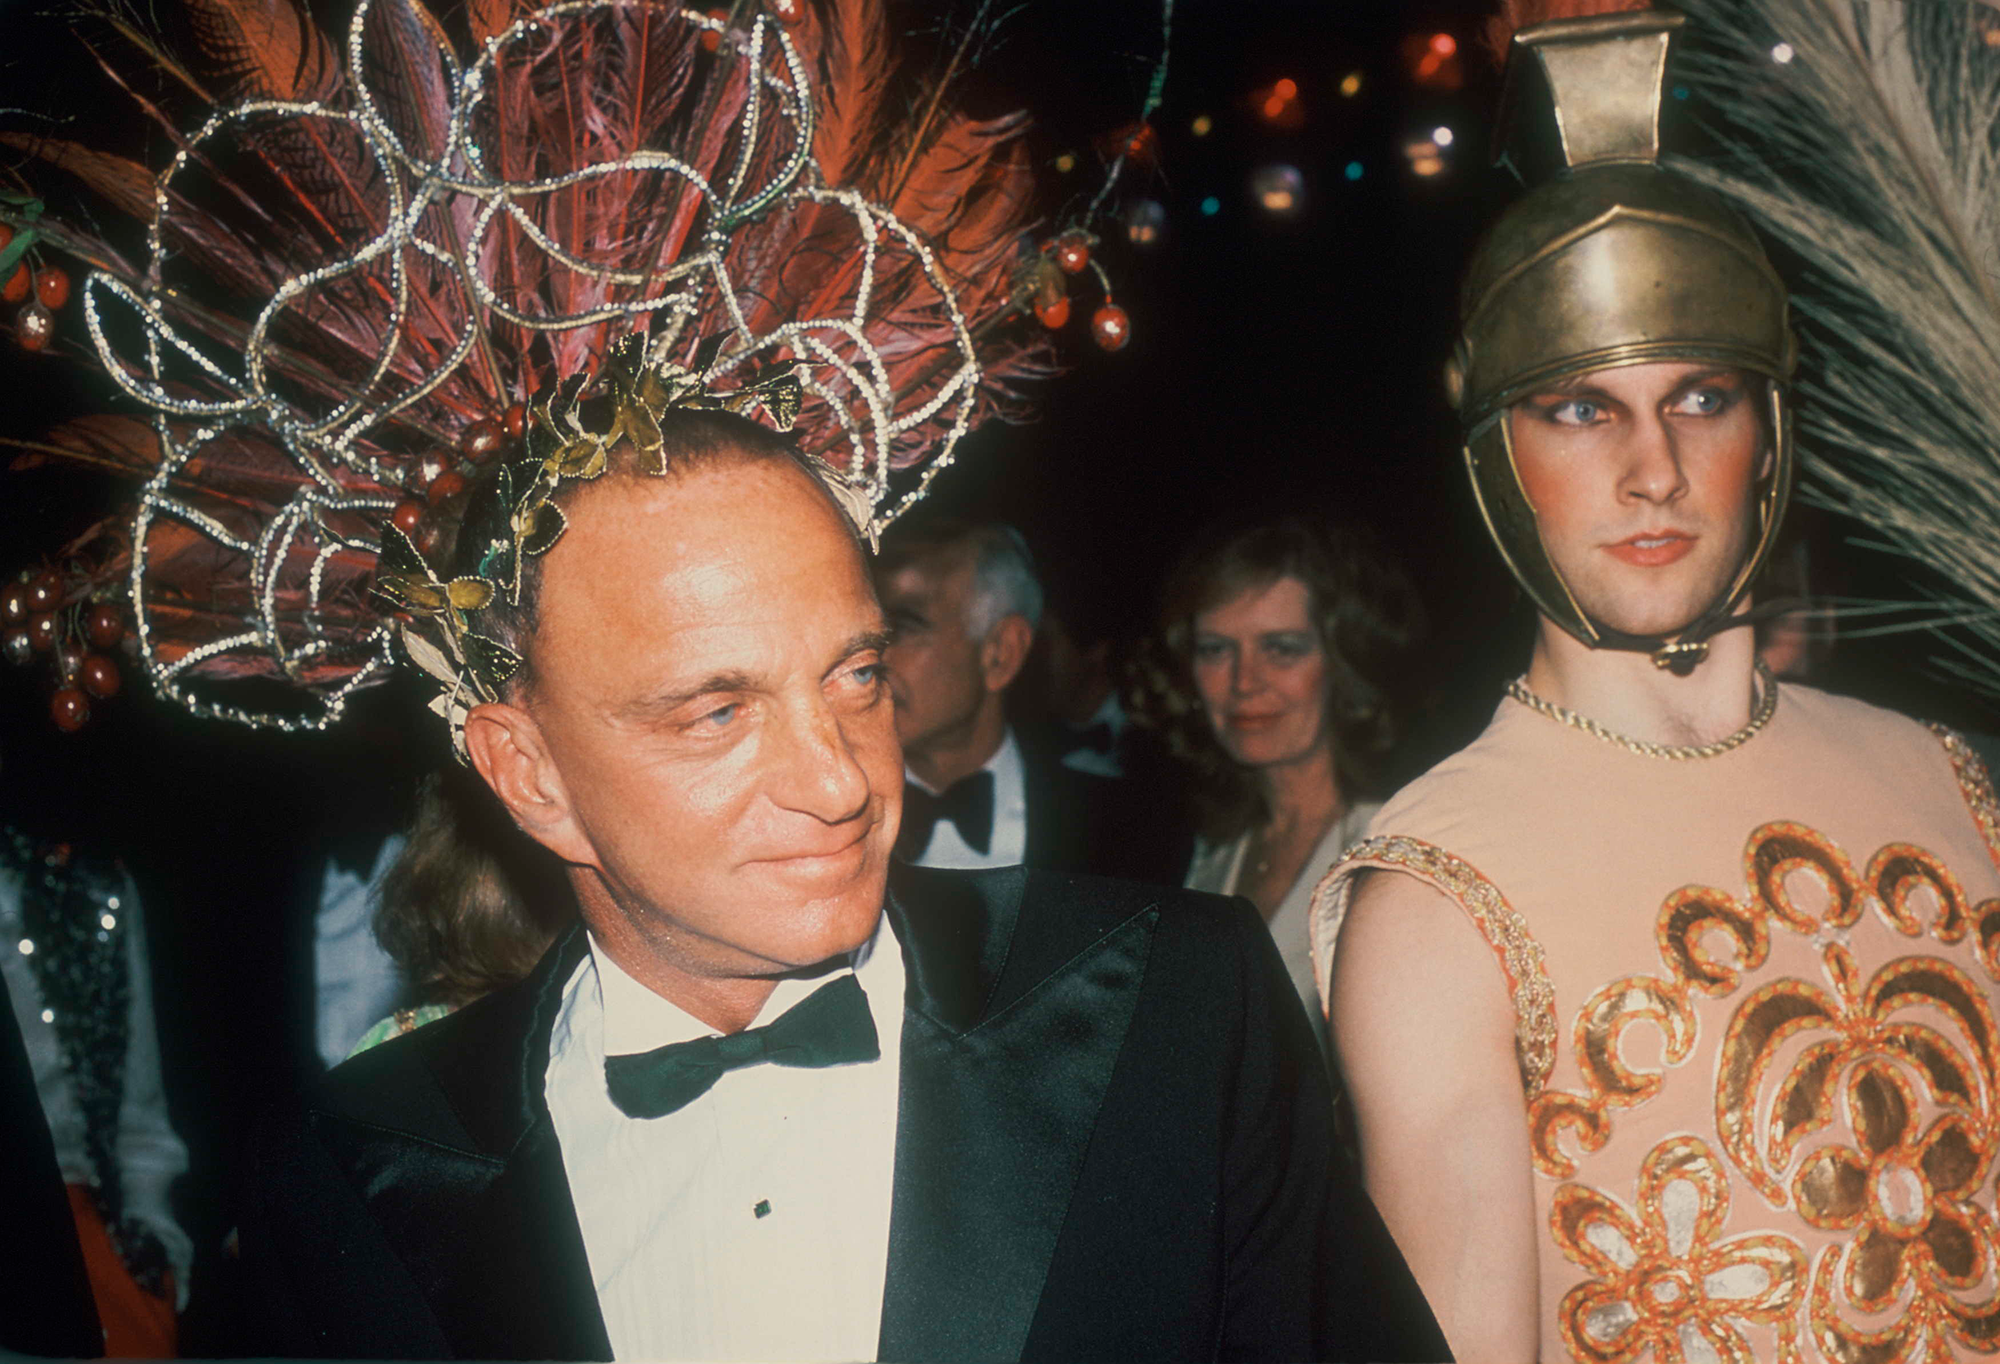 Roy Cohn and Donald Trump in a still.